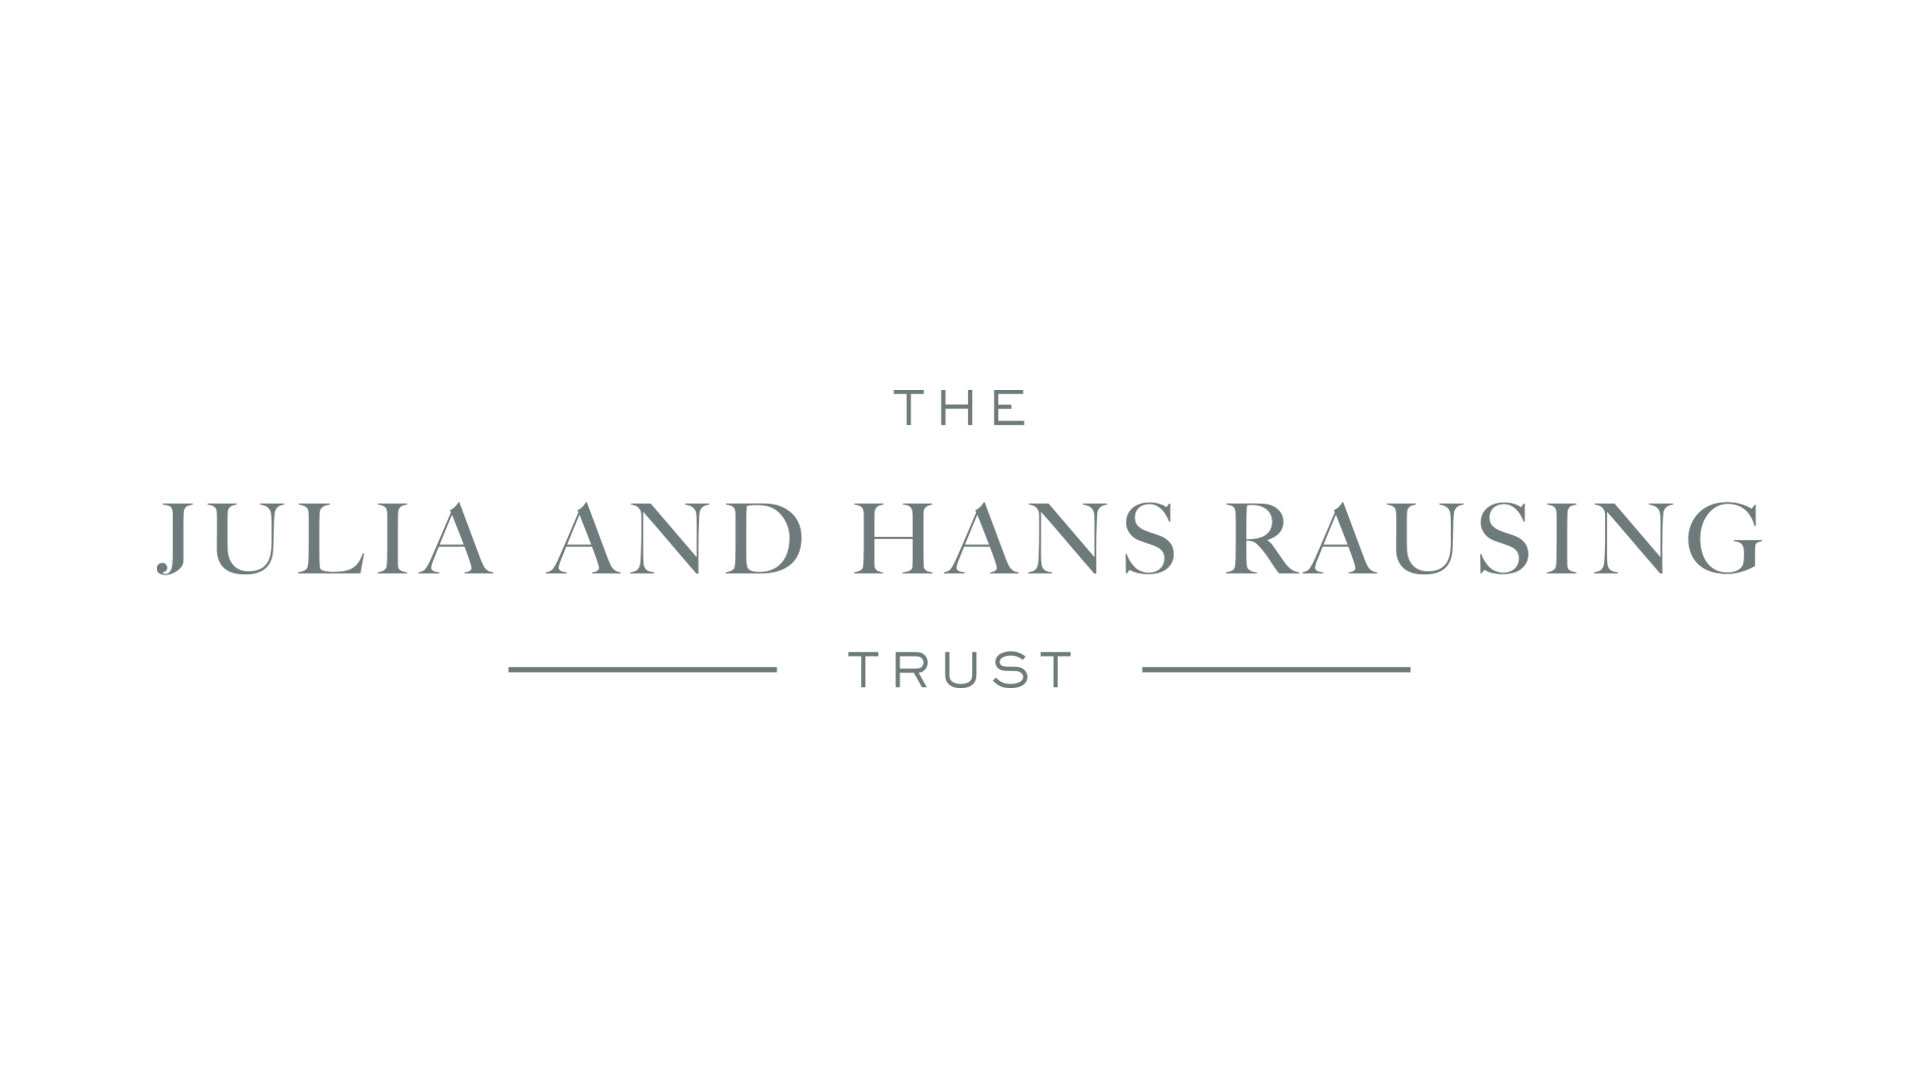 The Julia and Hans Rausing trust logo.